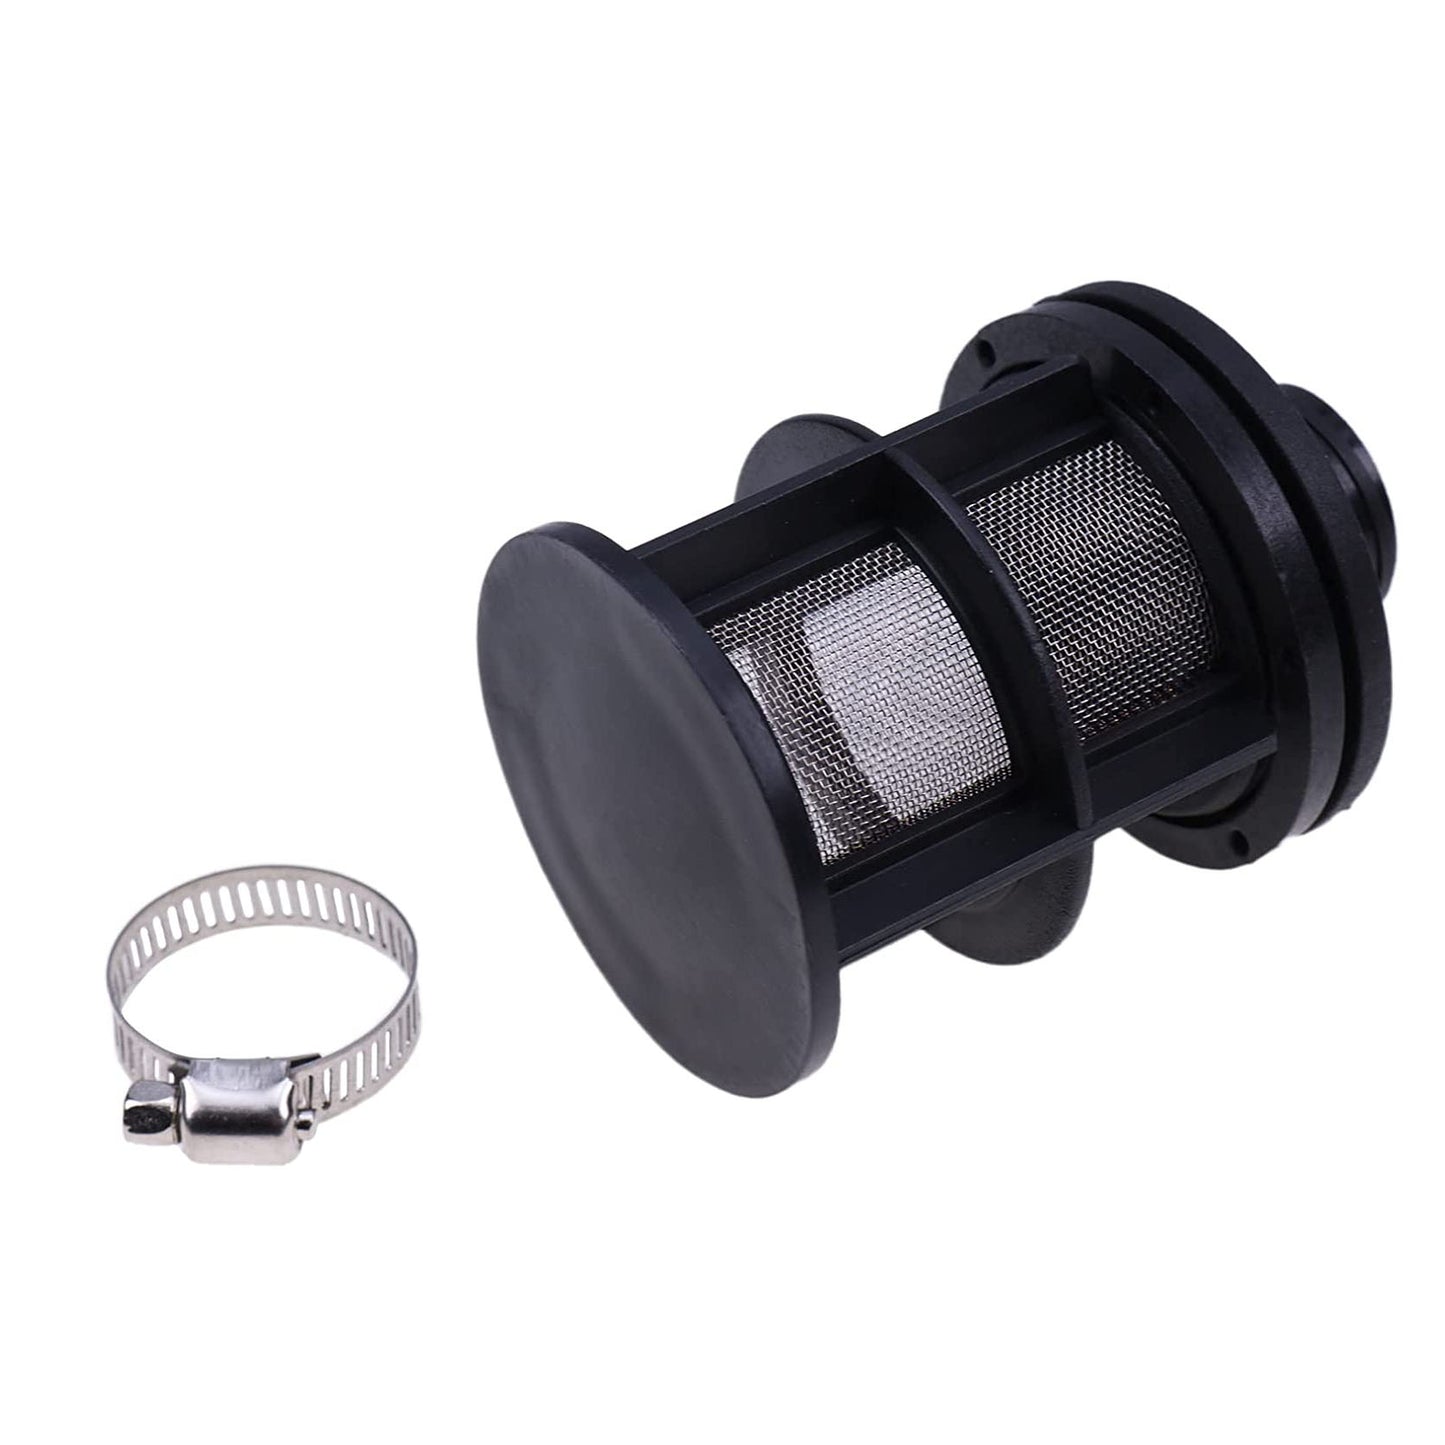 New 25mm Air Intake Filter Kit Silencer Muffler with Seal Clamp Compatible with Webasto Dometic Eberspacher Diesel Parking Heater Replace 251864810100 Exhaust Pipe